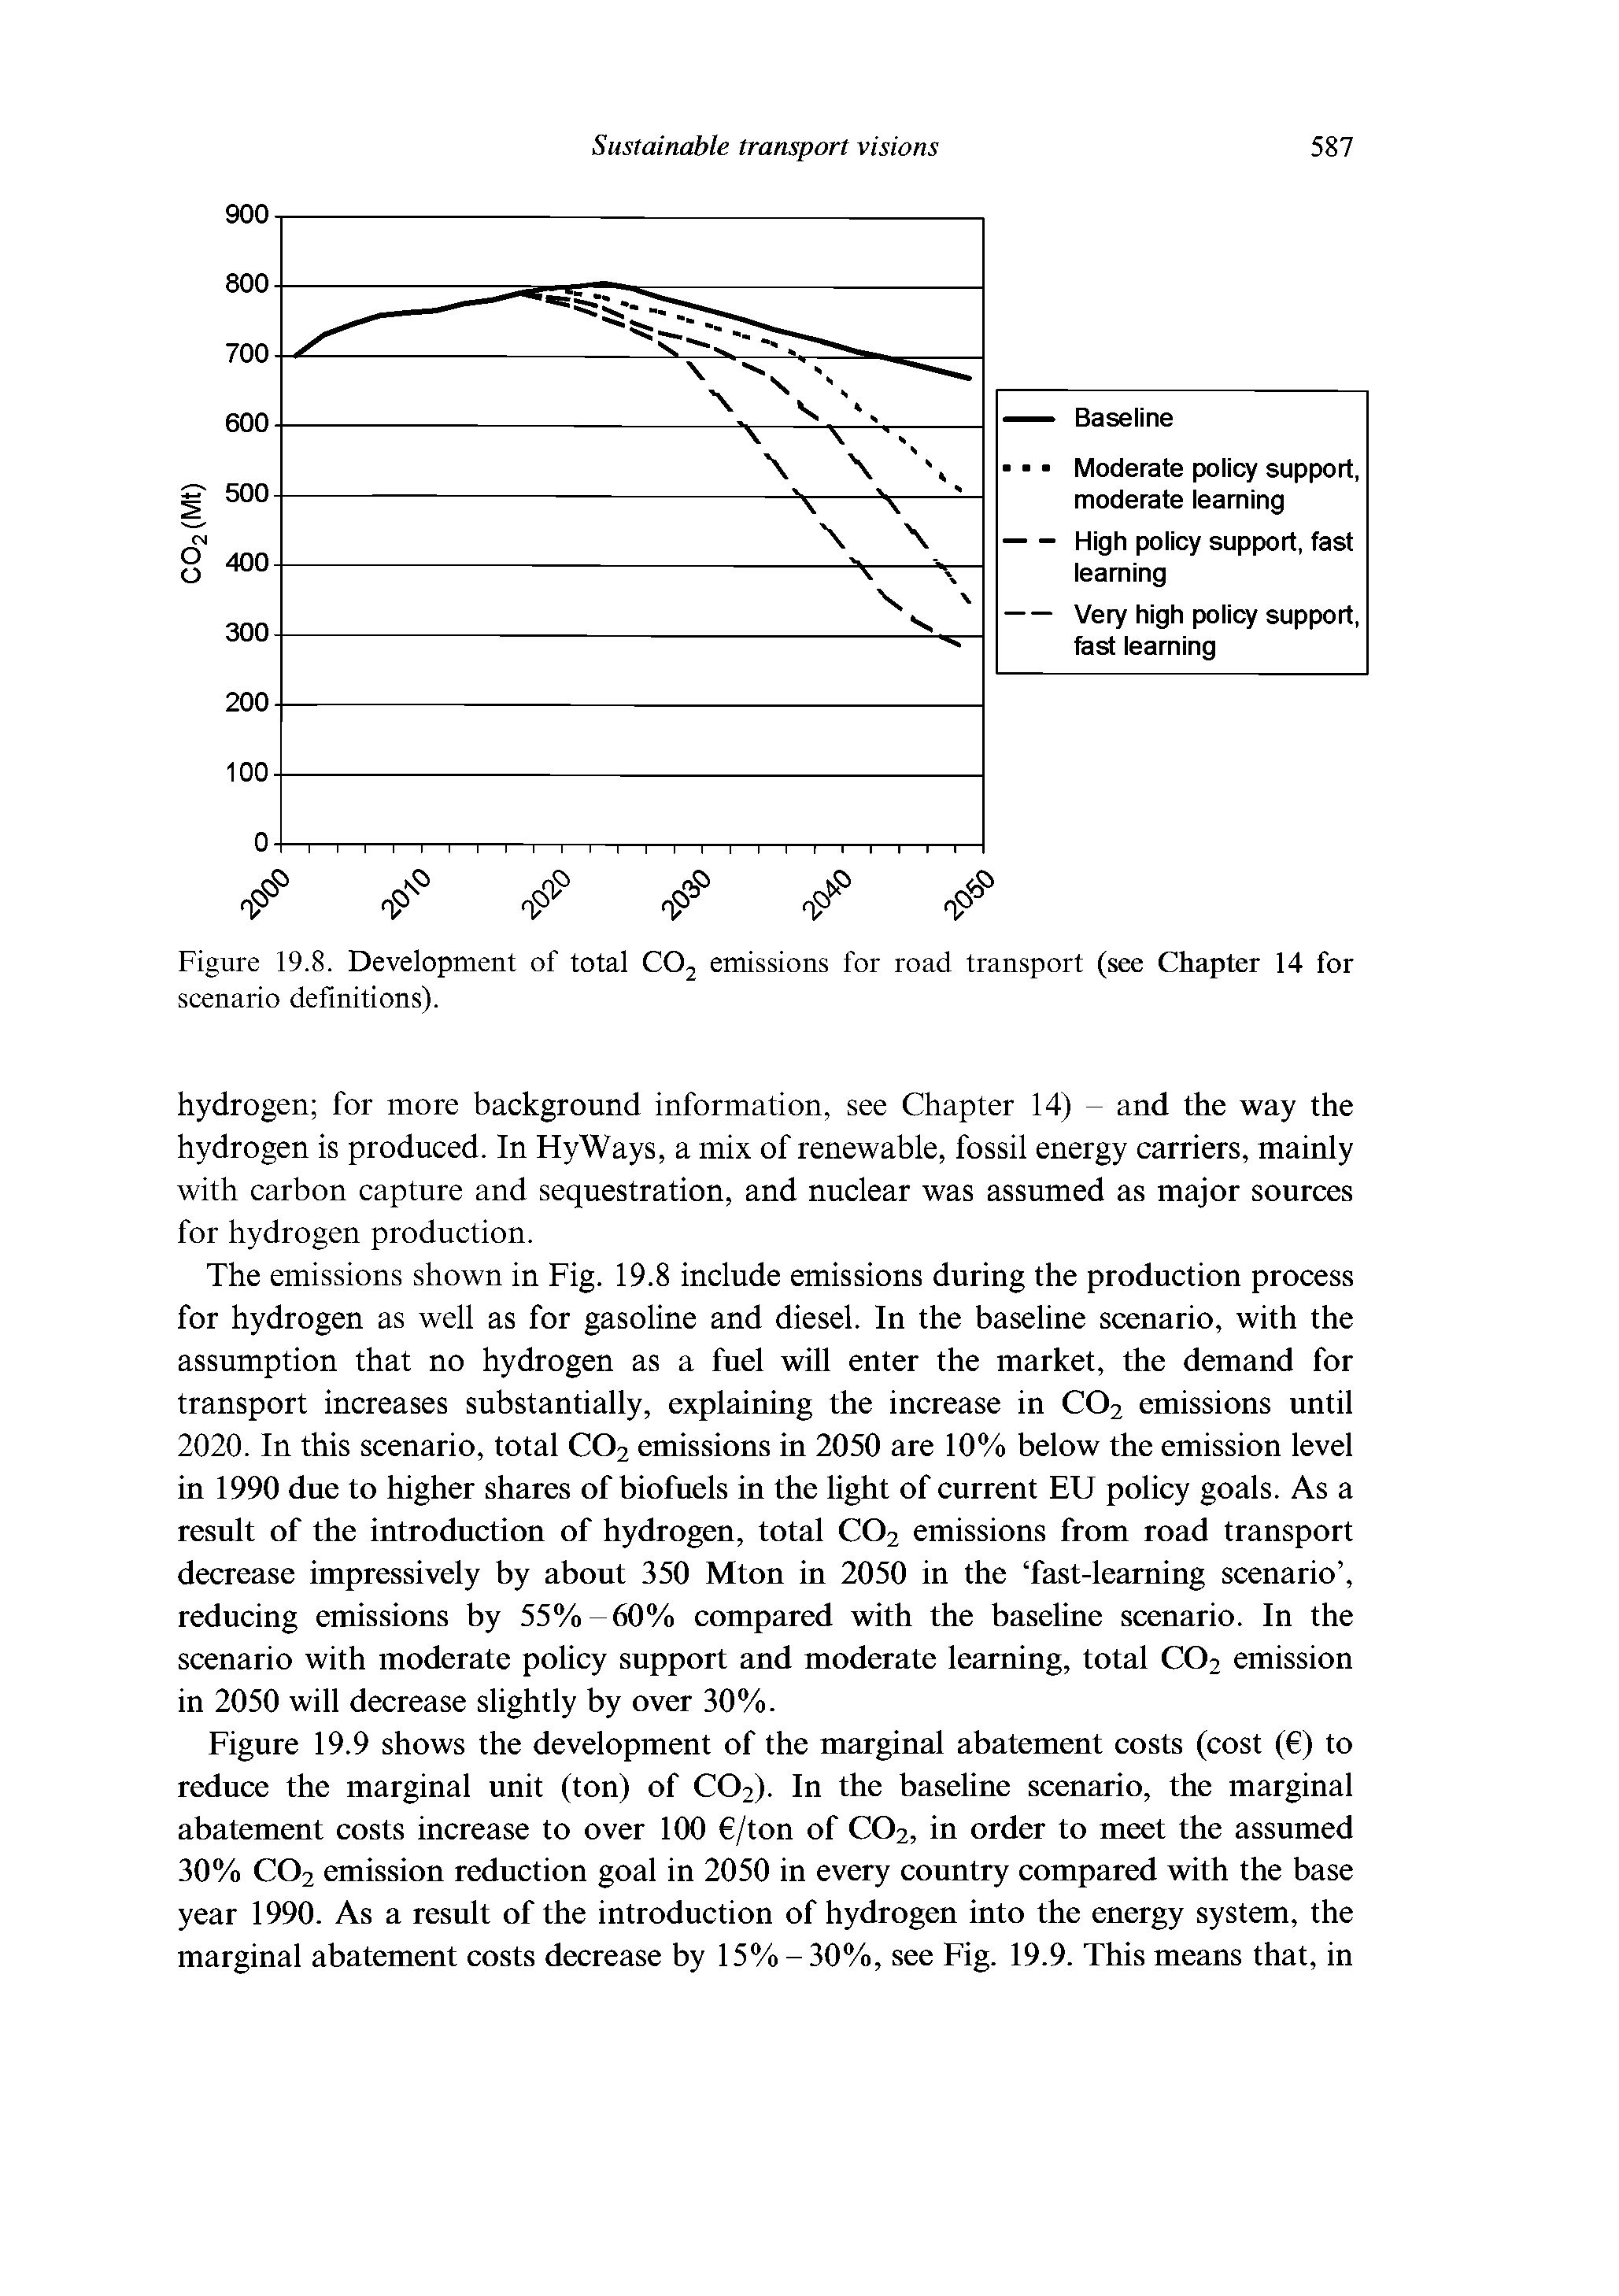 Figure 19.8. Development of total C02 emissions for road transport (see Chapter 14 for scenario definitions).